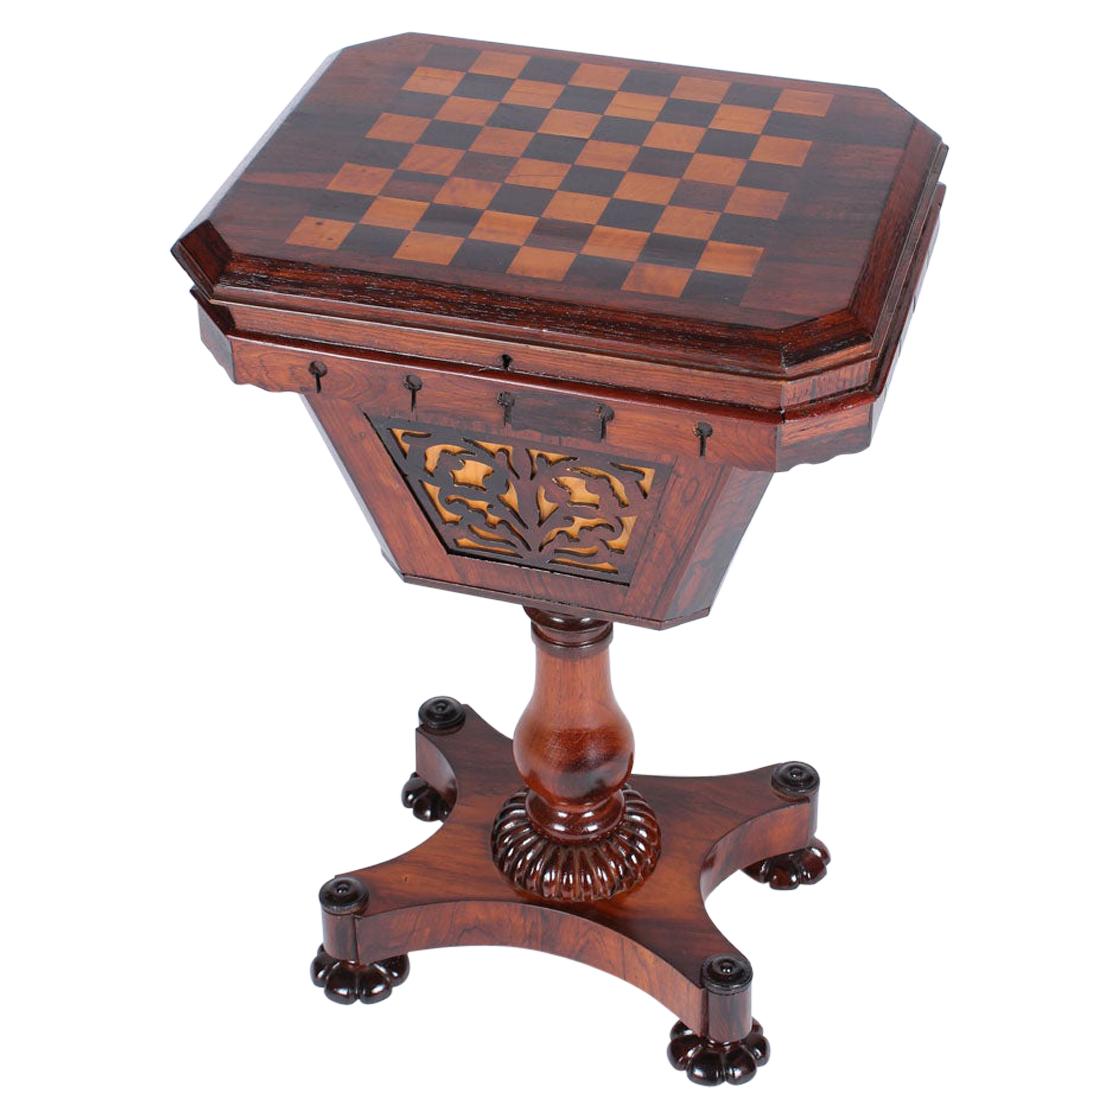 19th Century Antique Chess Table, Rosewood, Maple, Germany, circa 1870